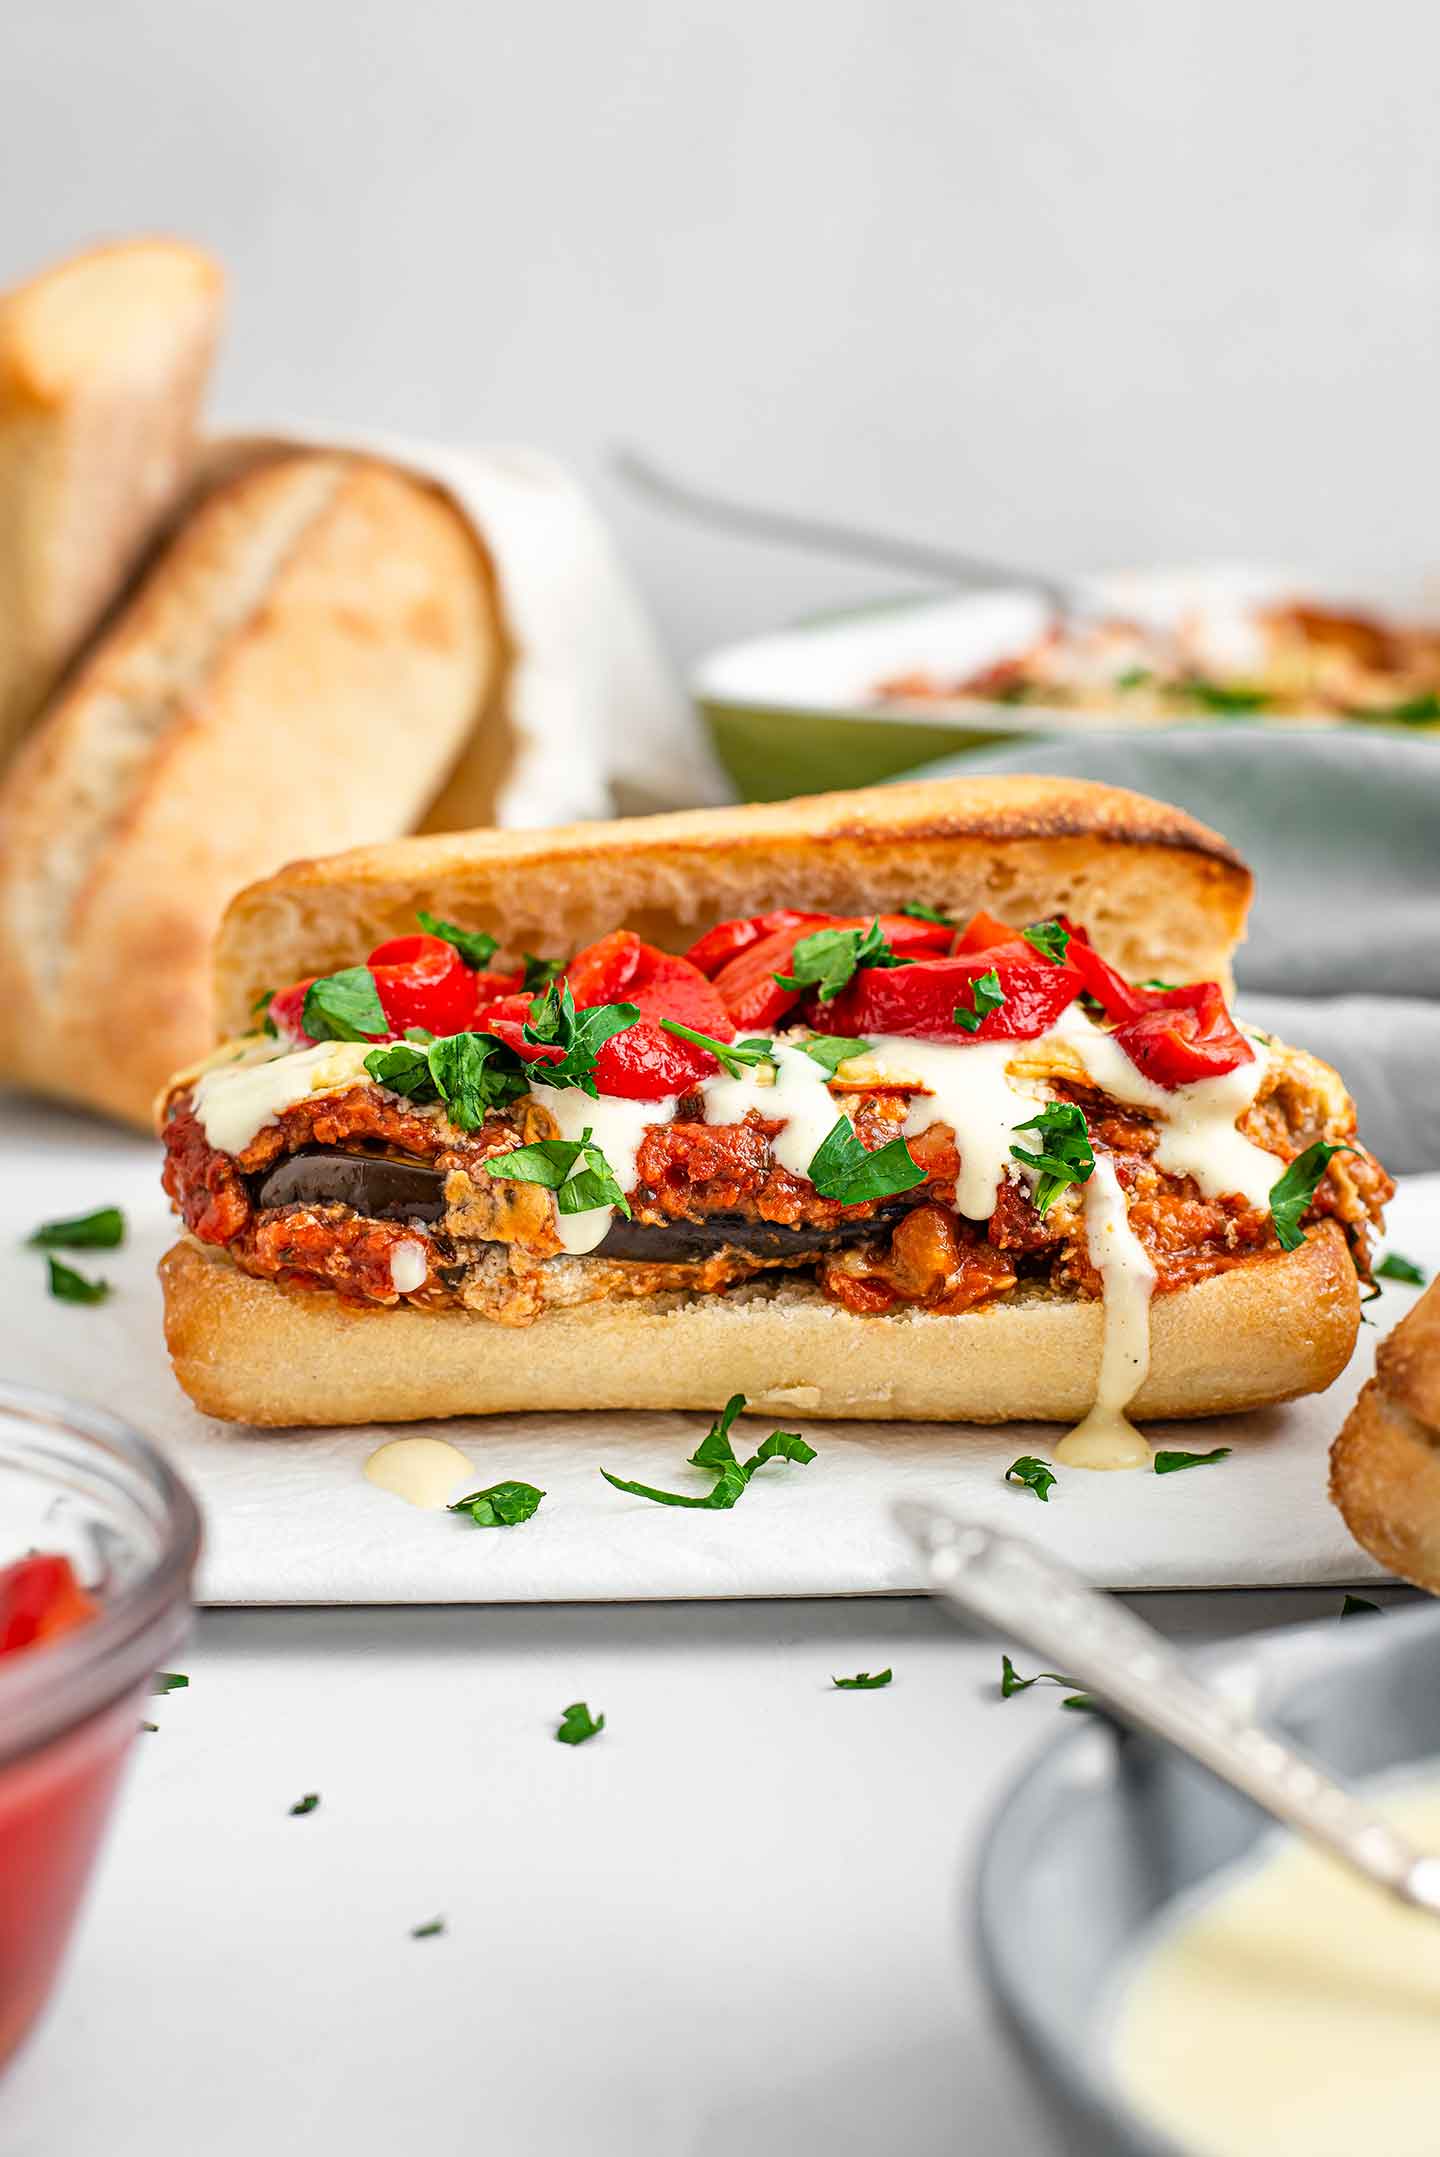 The top of a ciabatta bun rests against the loaded sandwich. Messy eggplant parmesan is topped with drizzled bechamel, parsley, and sliced roasted red peppers. More buns and eggplant parm are in the background.